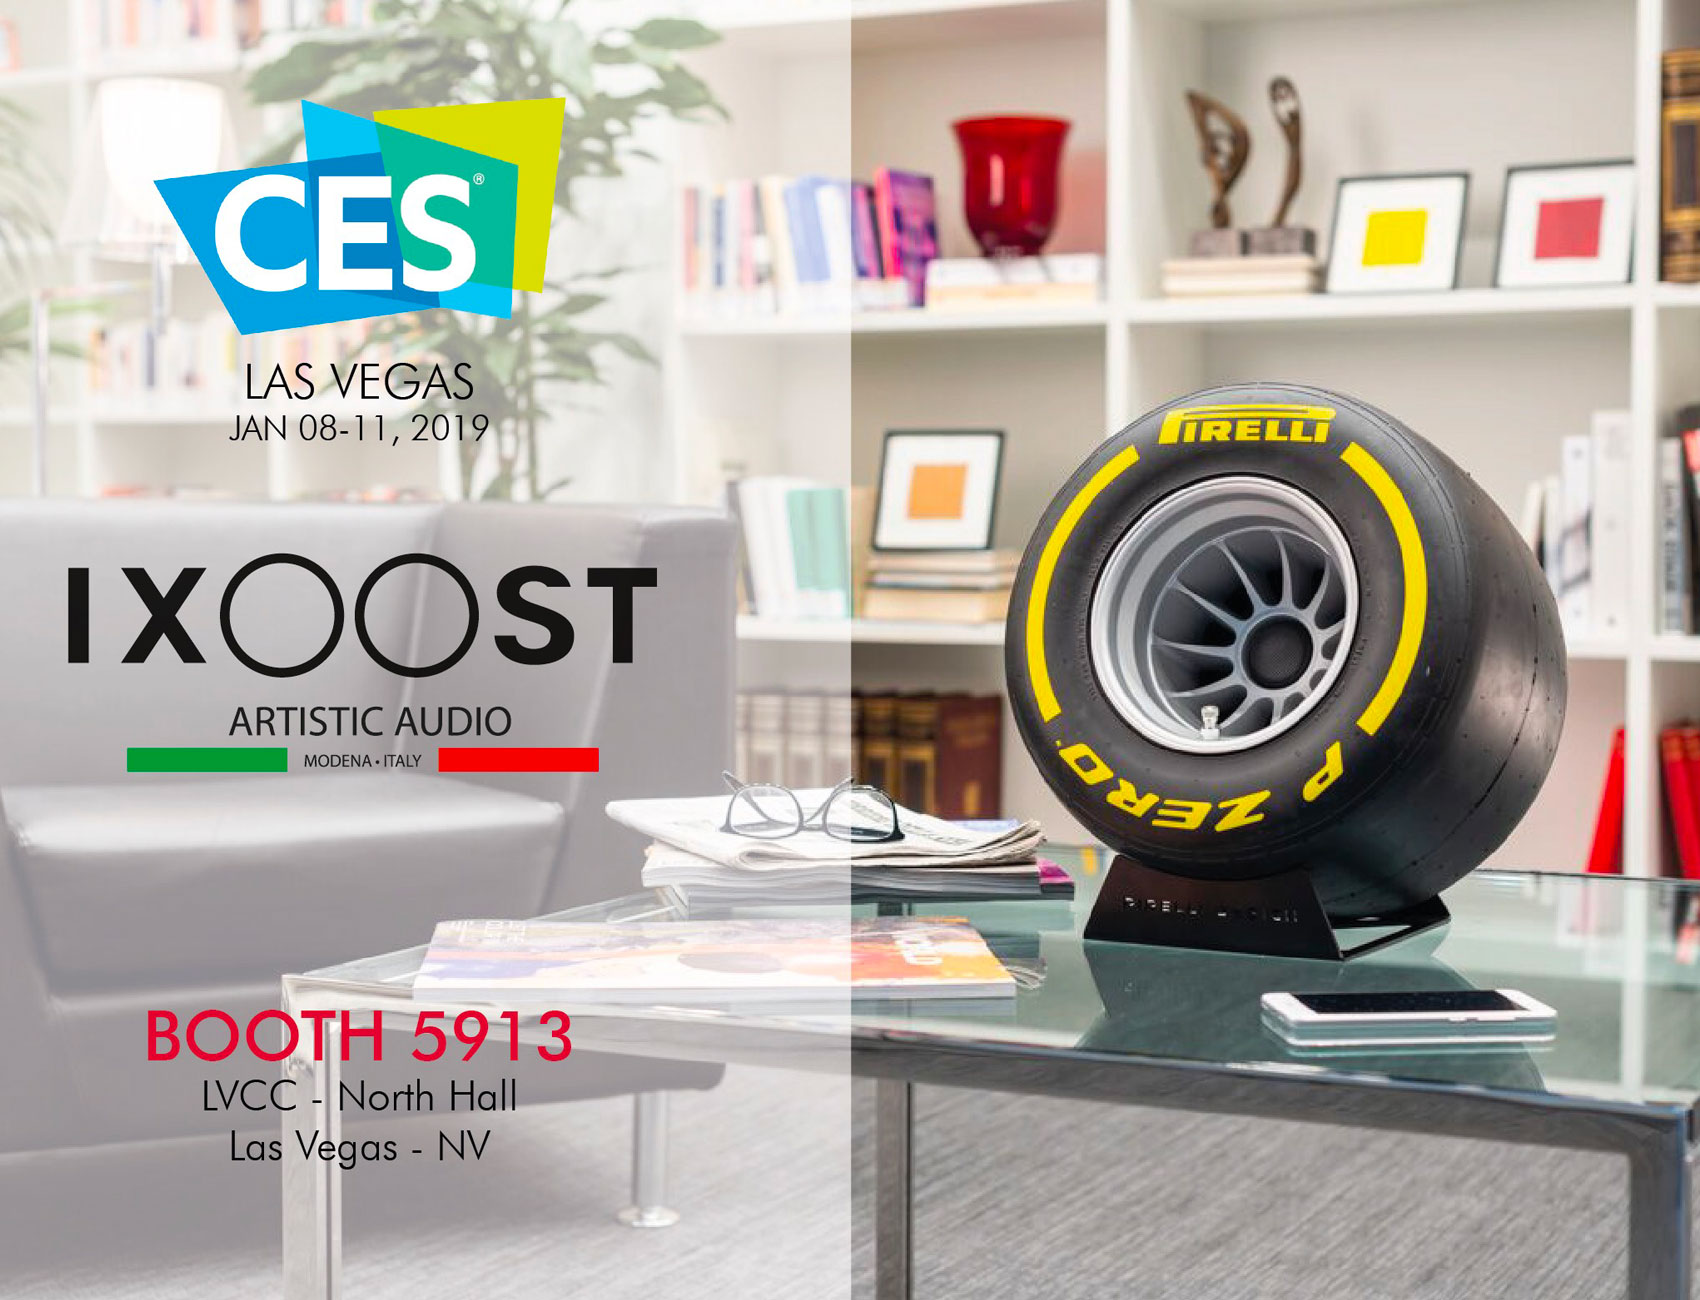 IXOOST home sound system at CES Las Vegas